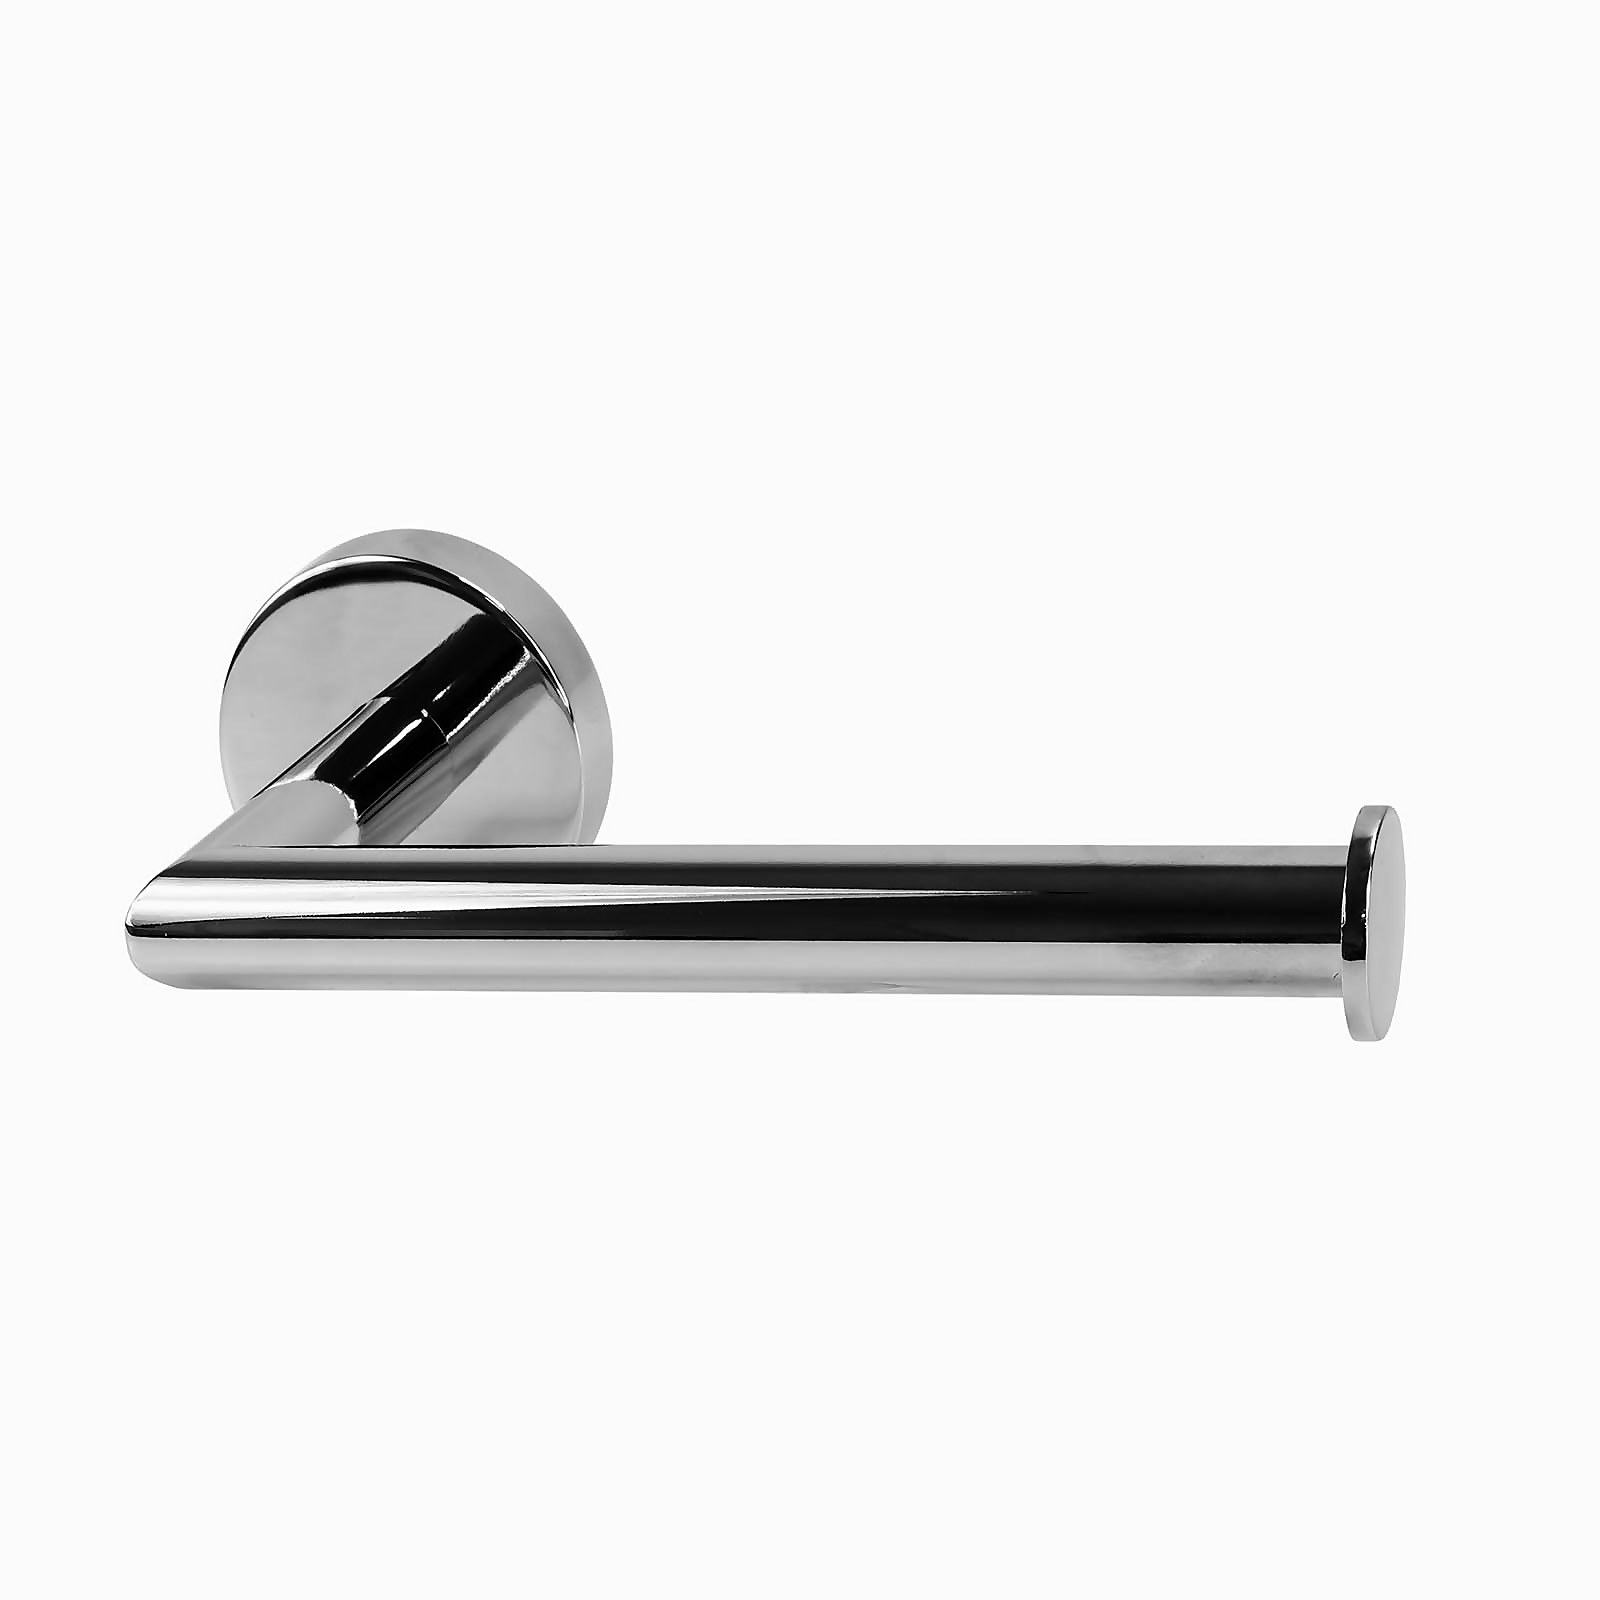 Photo of Self Adhesive Toilet Roll Holder - Chrome